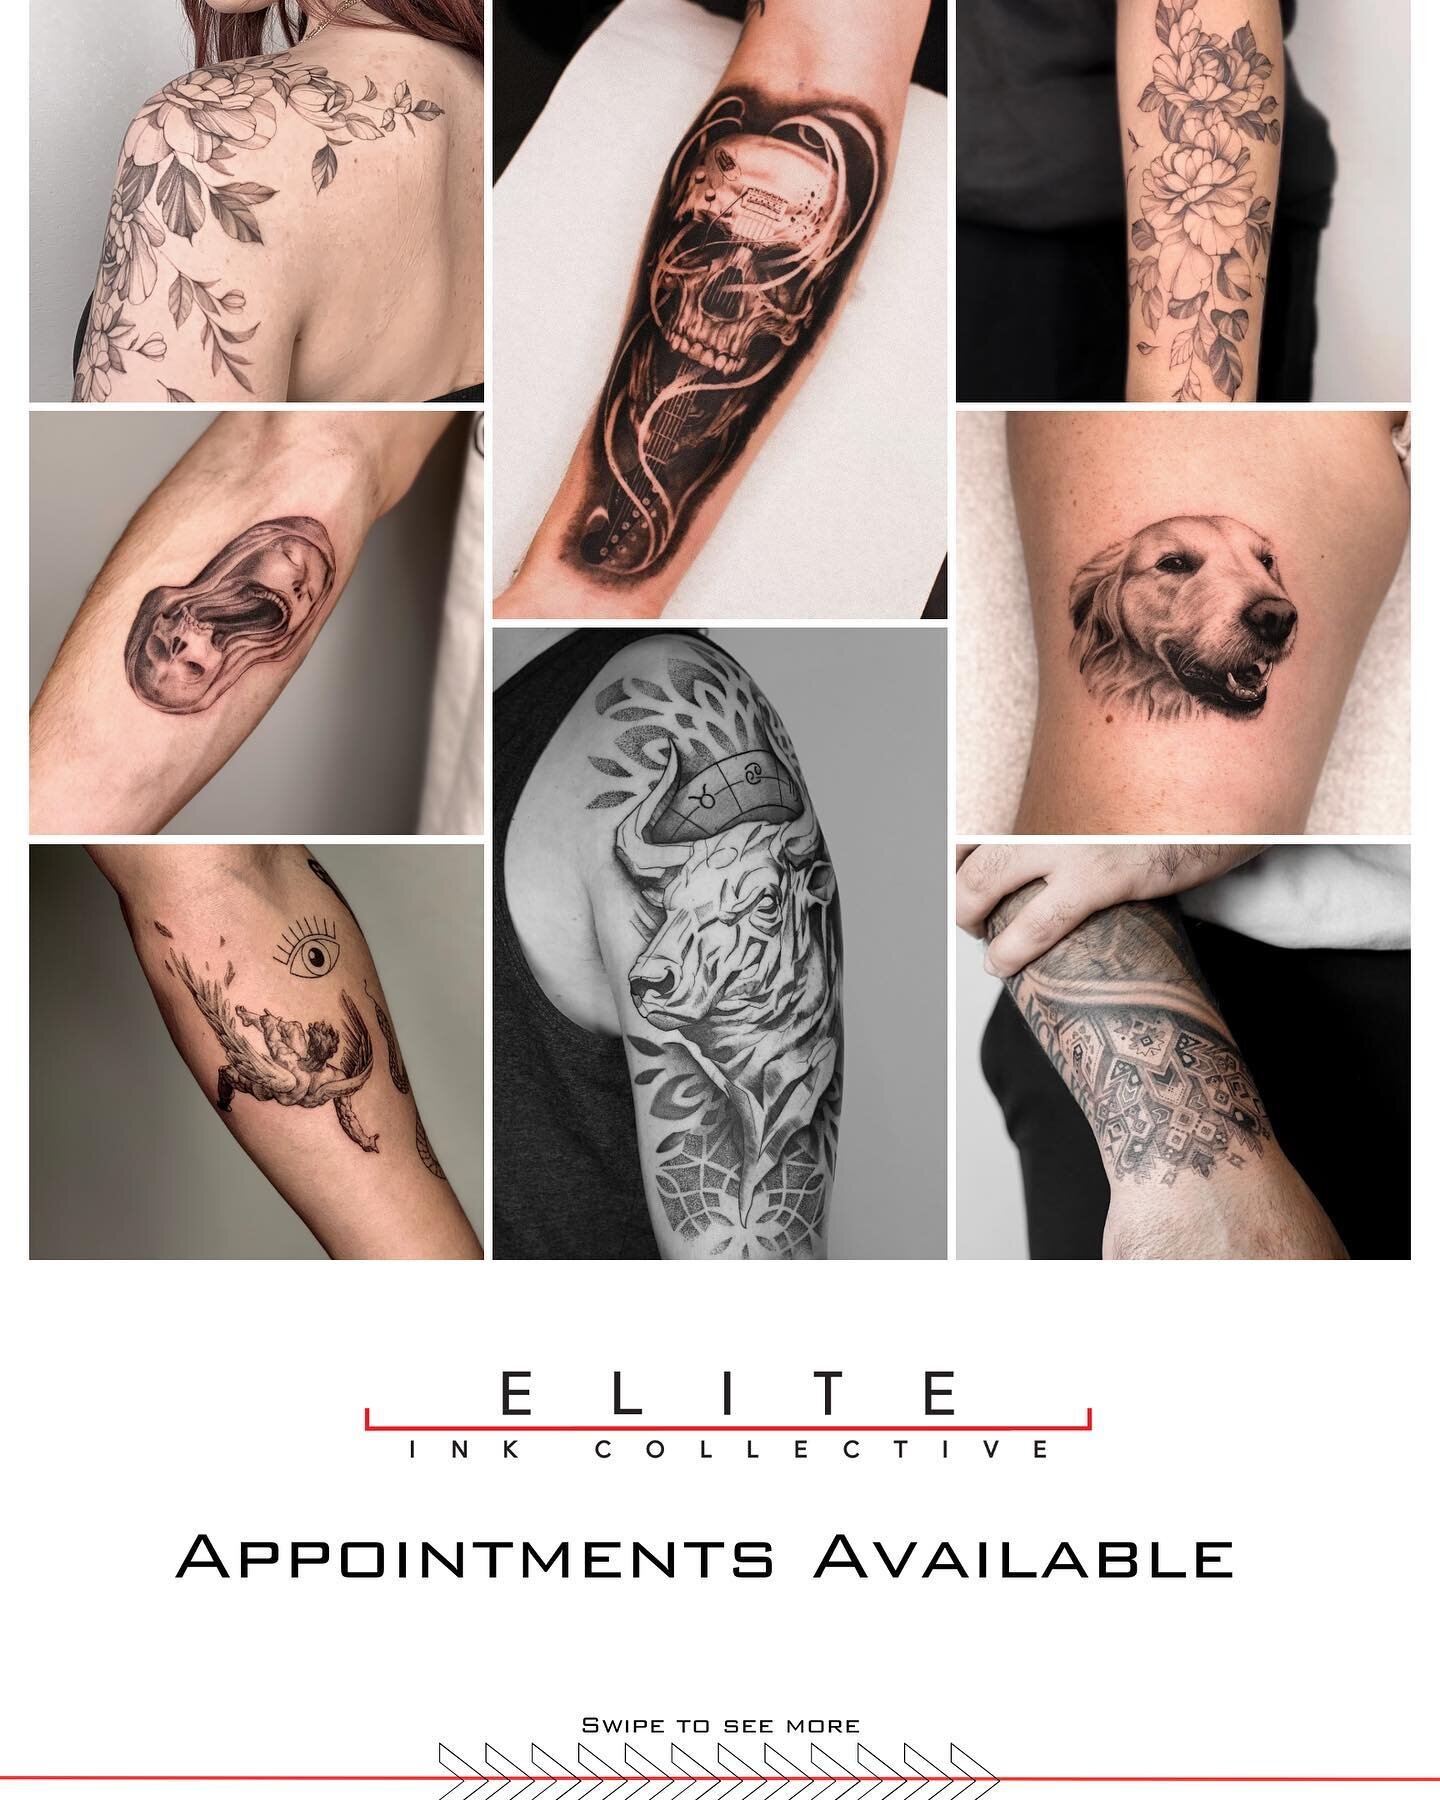 Appointments Available! Now booking for April &amp; May. Check out our artists&rsquo; work from Fine Line tattoos to Realism. We&rsquo;re looking forward to seeing what ideas you have in store for us 🙏🏼
&bull;
&bull;
&bull;
DM/Email or Call the sho